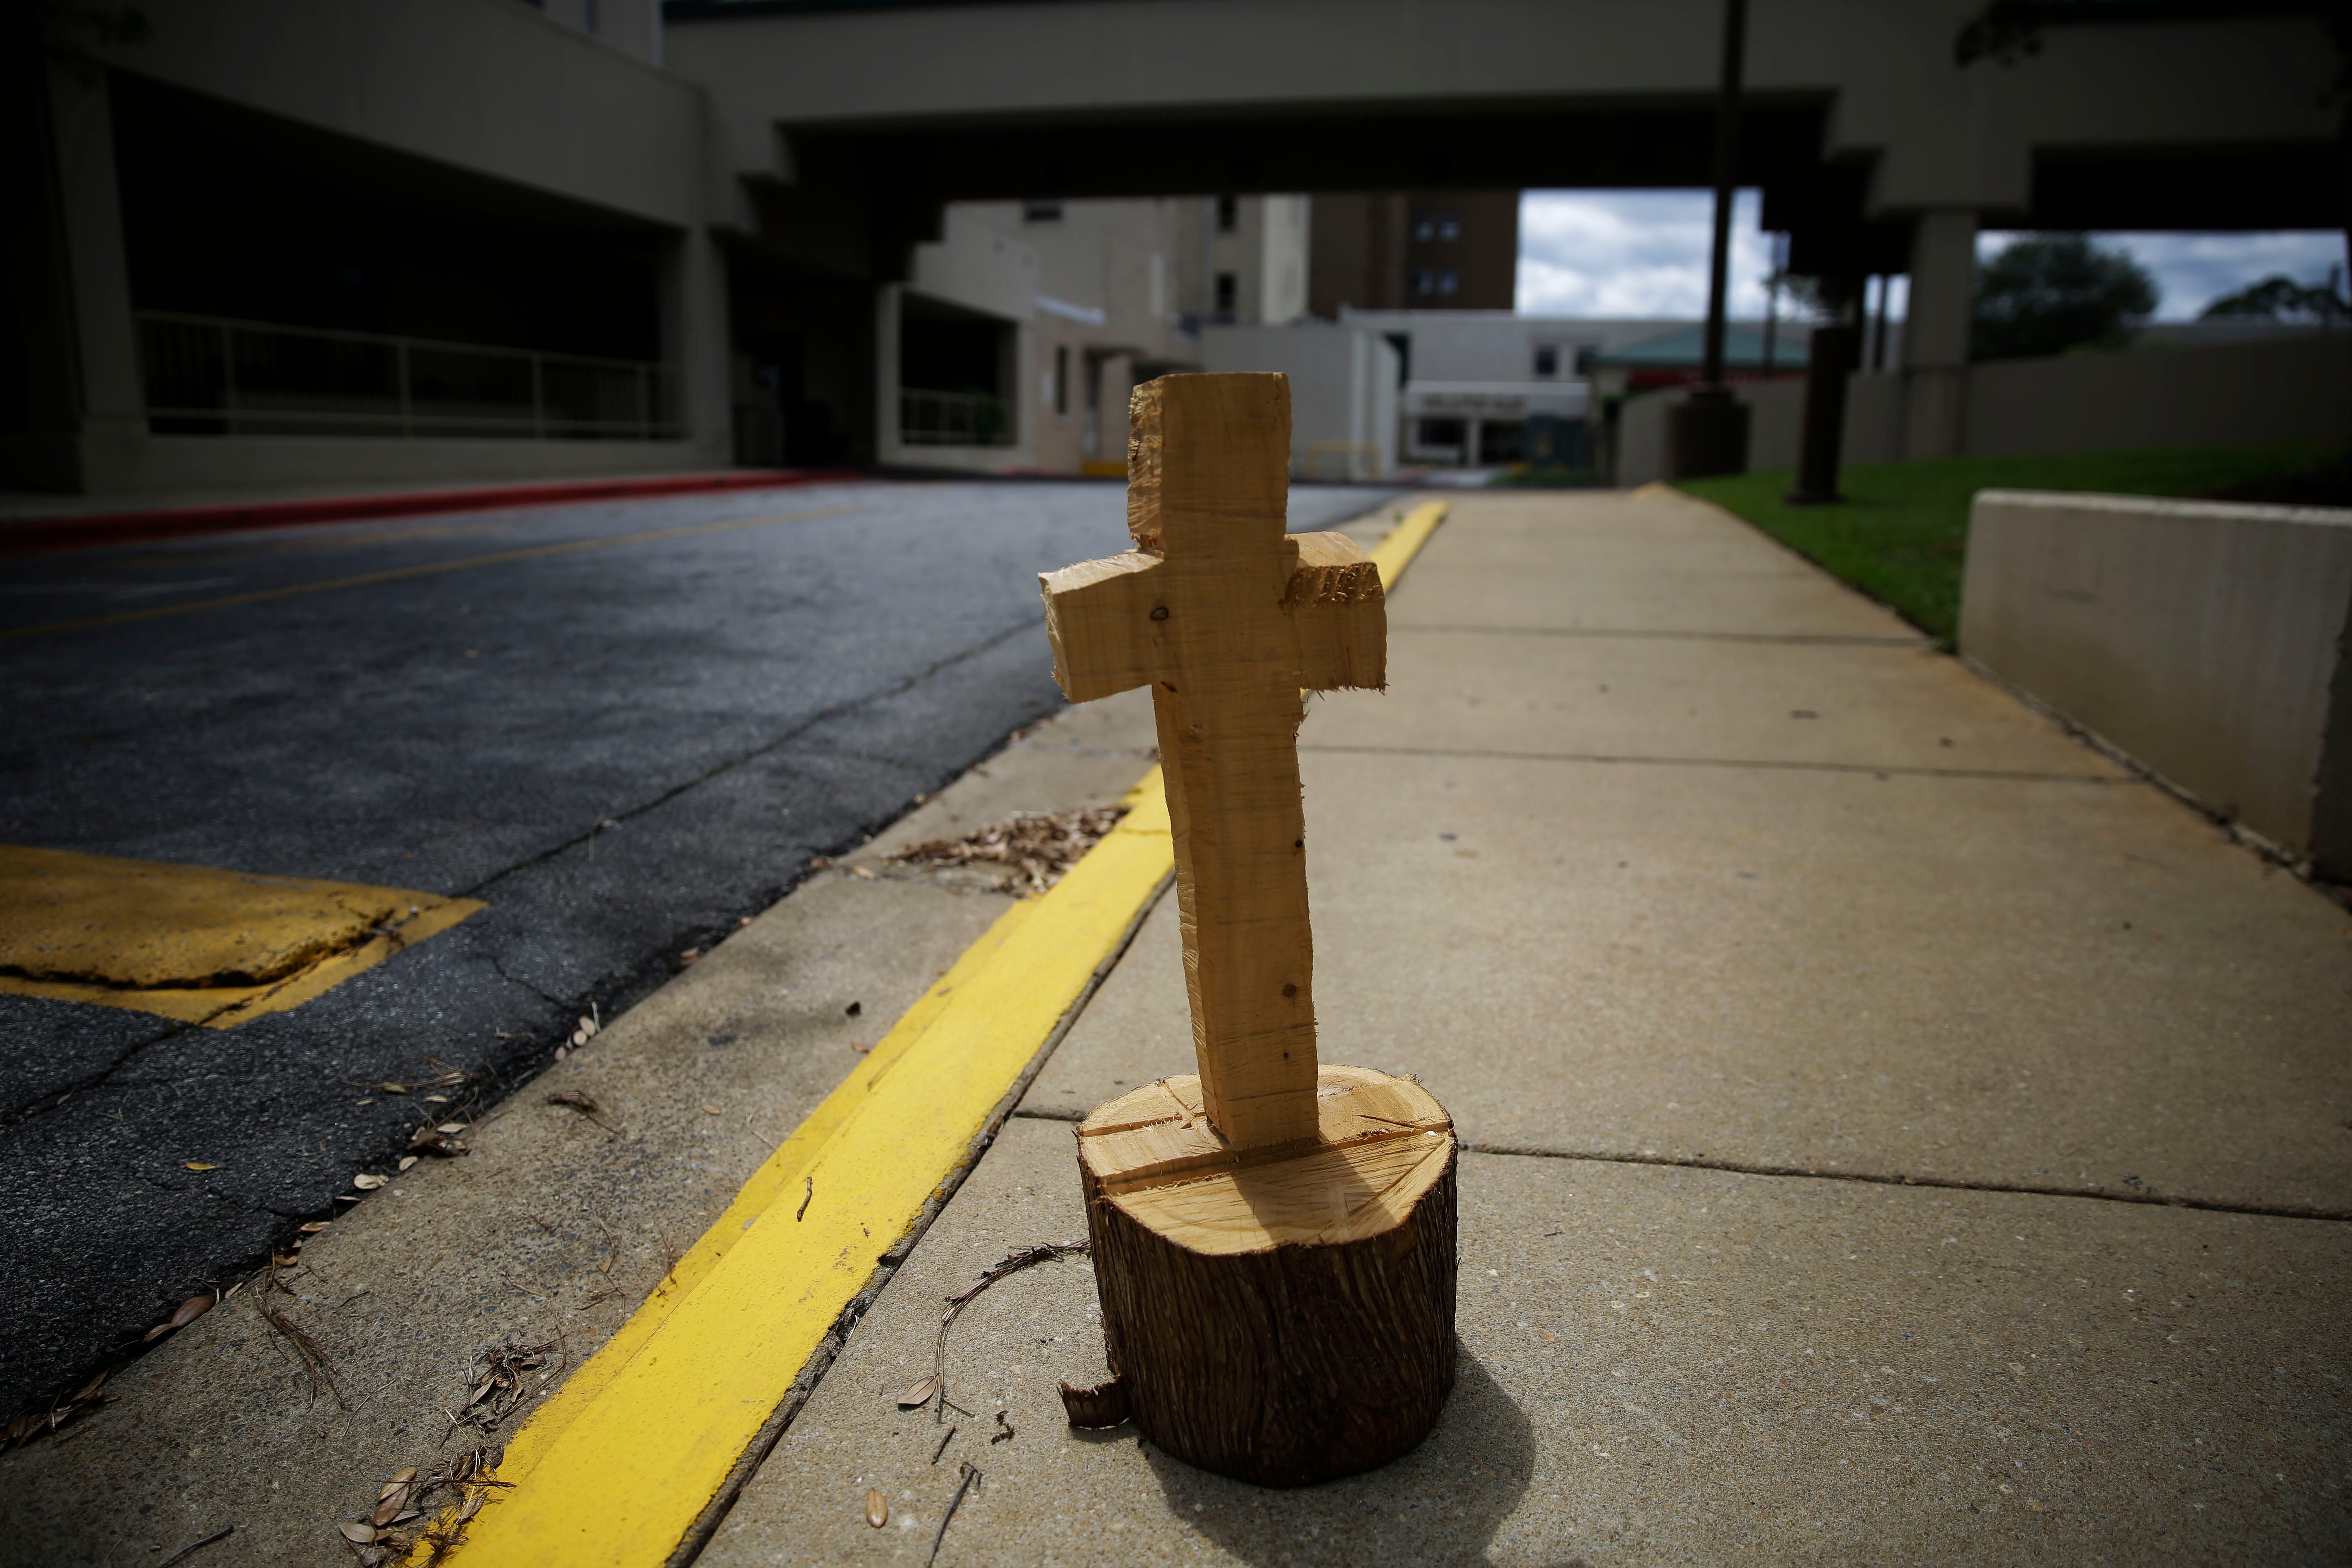 A wooden cross made from a tree stump, known by some locals as a symbol of hope, sits outside of Phoebe Putney Memorial hospital on Monday, April 20, 2020, in Albany, Ga. The patients were very sick. Some died within hours. Some died on the way, in the back of ambulances. The region is predominantly black, but even so, African Americans died disproportionally, said Phoebe Putney Memorial's chief executive officer Scott Steiner. In the 10 counties in the cluster hit hard by coronavirus, the population is 55 percent black. But African Americans account for about 80 percent the deaths at the hospital.